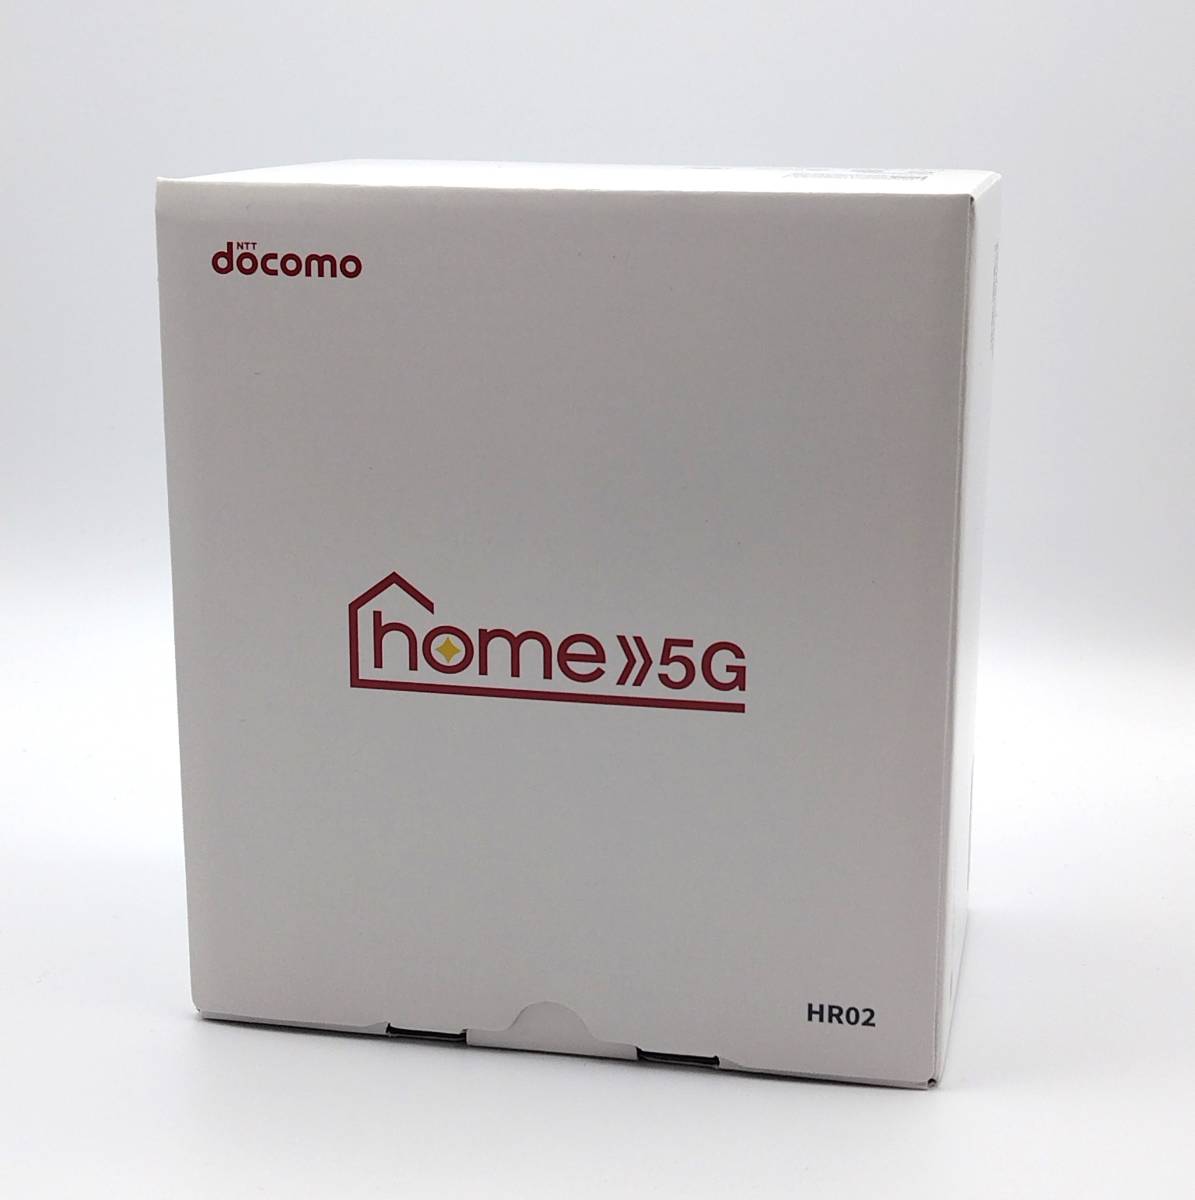 unused docomo Home router home 5G HR02 dark gray judgment 0 IMEI